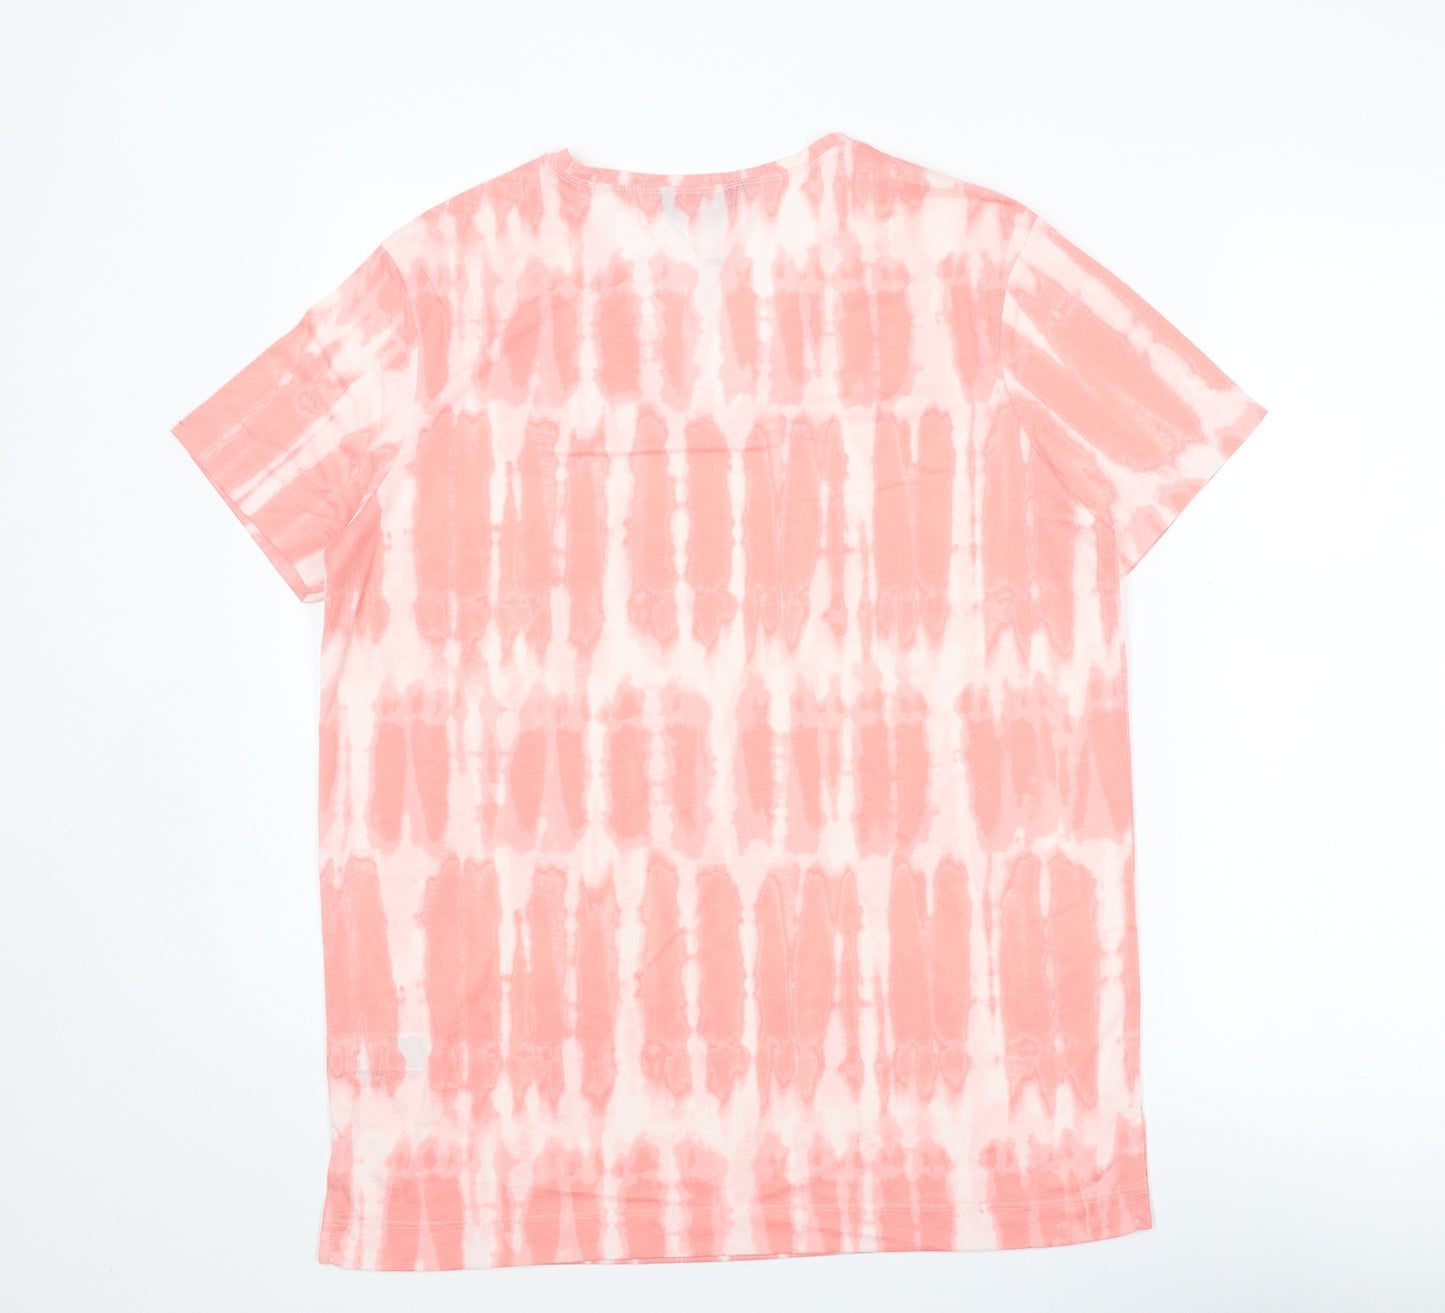 Marks and Spencer Womens Pink Geometric Polyester Basic T-Shirt Size 12 V-Neck - Tie-Dye